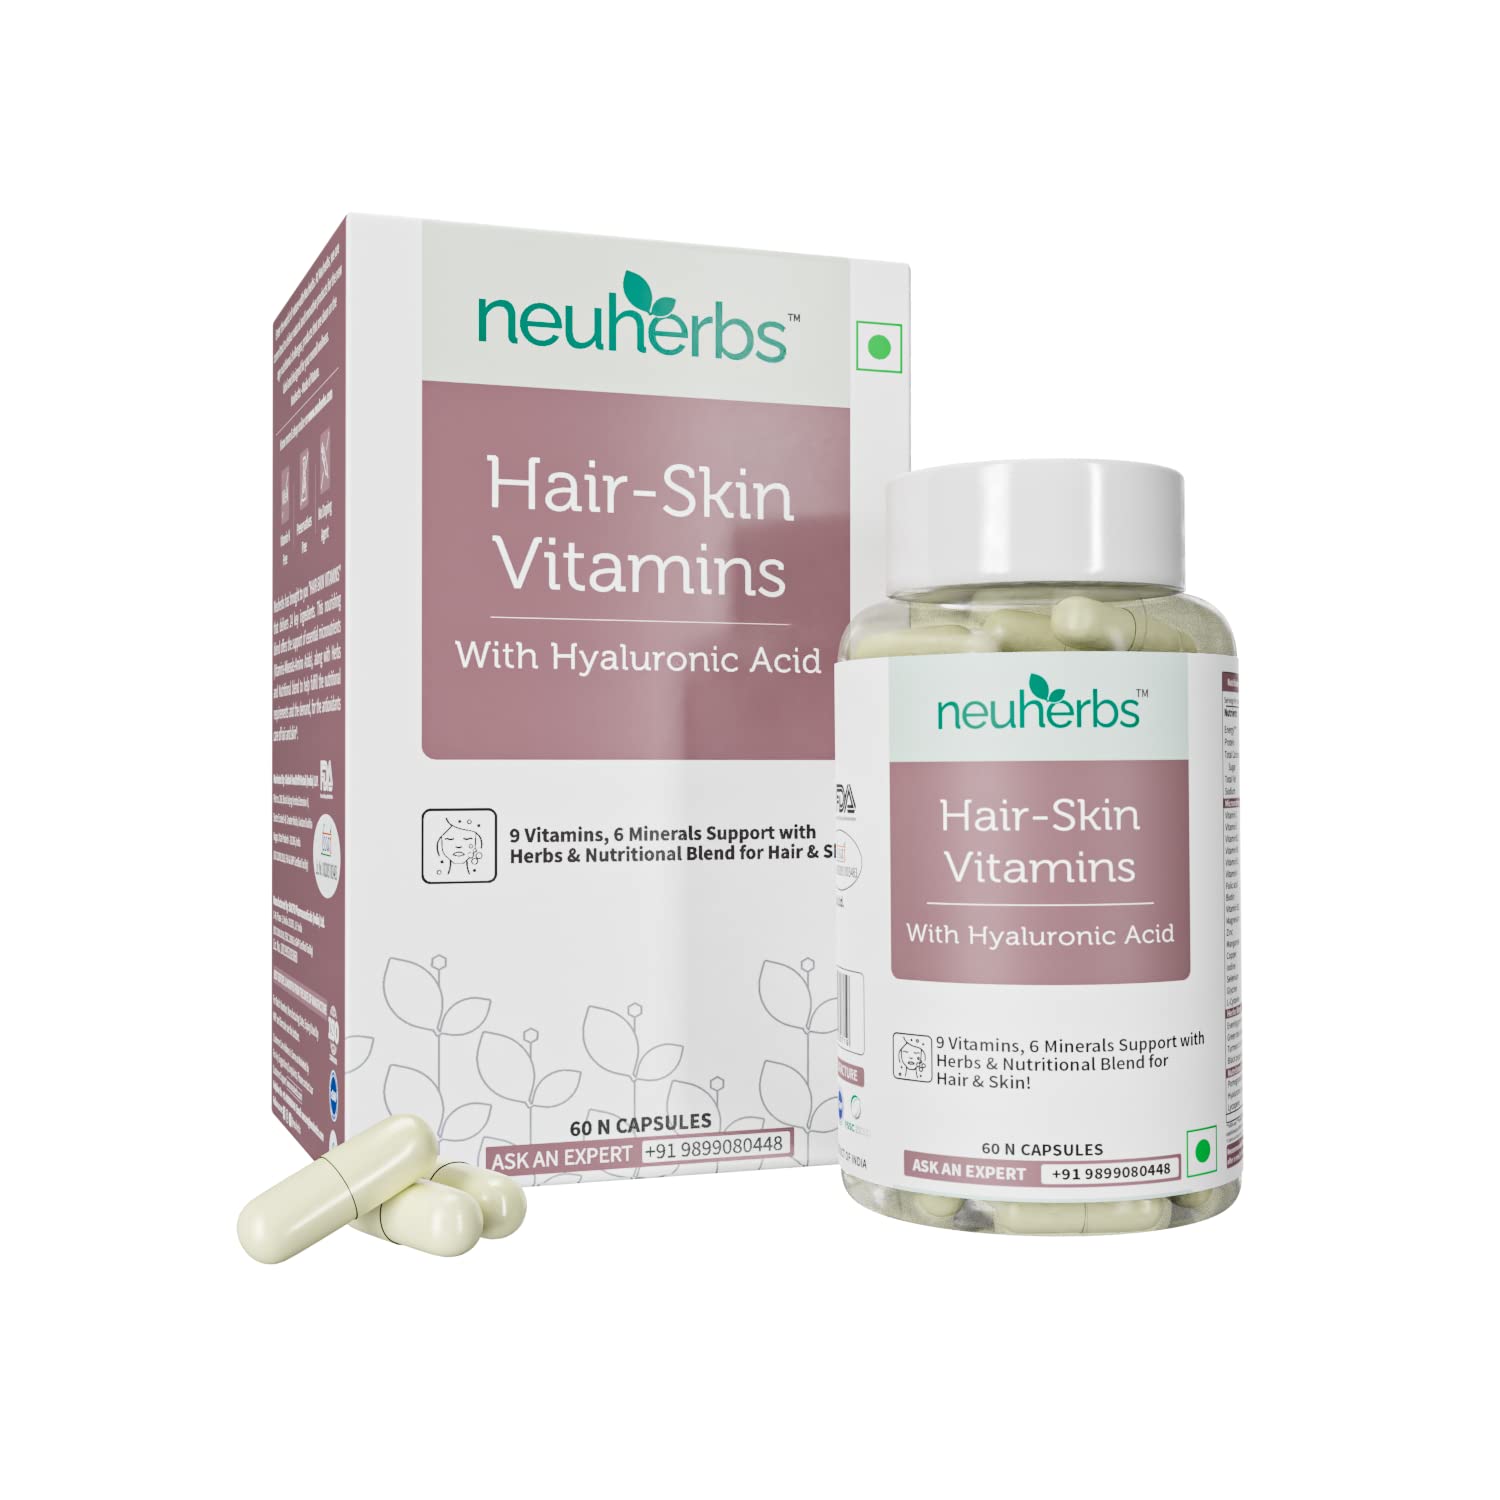 Neuherbs Hair Skin Vitamins Supplement with Hyaluronic Acid, Biotin, Keratin booster for hair growthathione & Collagen- 120 Capsules for Men and Women